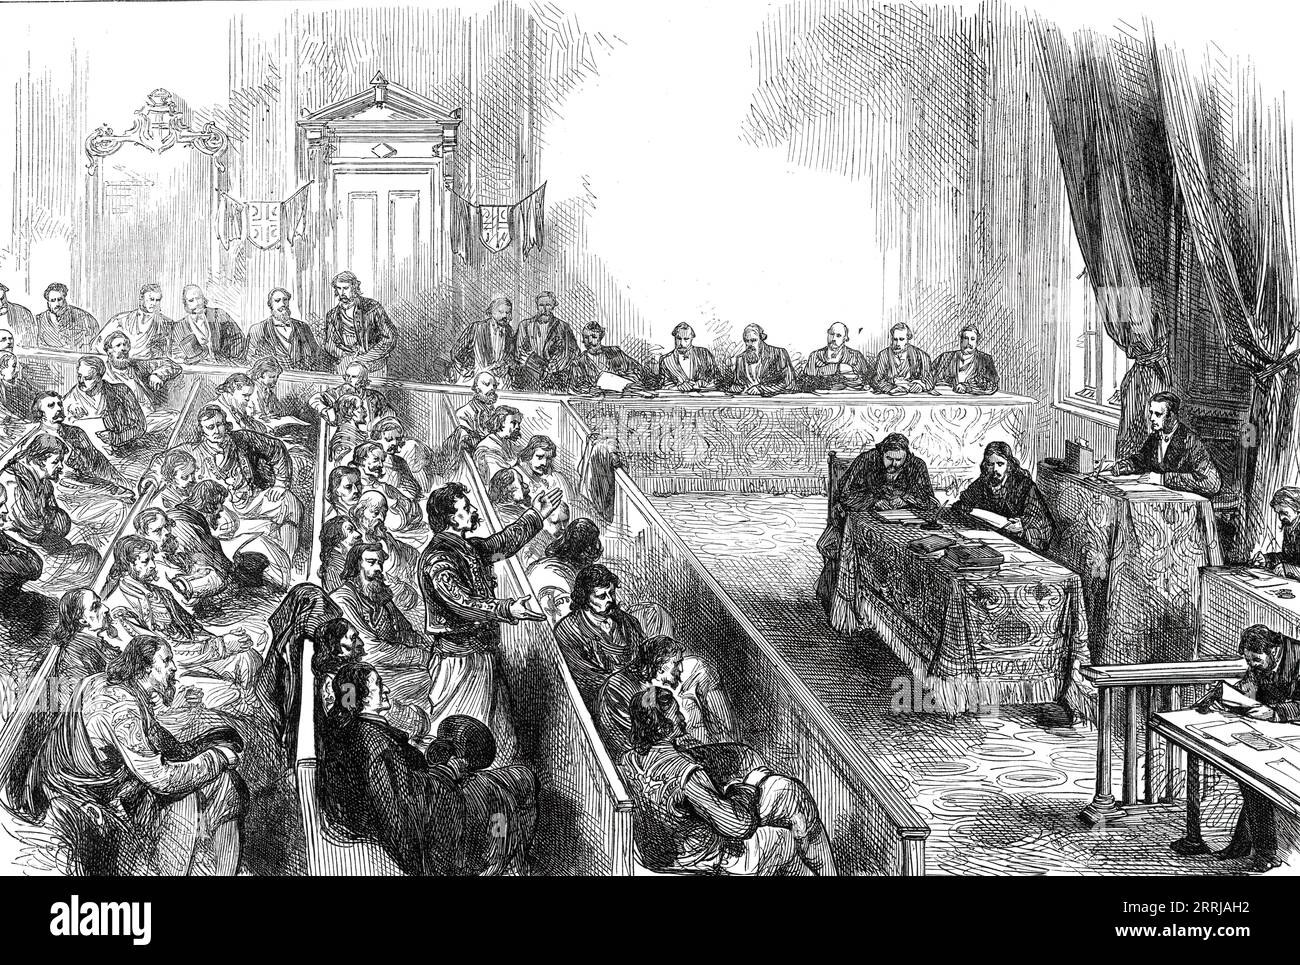 Sitting of the Skouptschina, or Parliament of Servia, 1876. Engraving after a sketch by '...M. Charles Yriarte, the well-known French traveller and historian. It represents a scene which strikes the observer as quaint and peculiar, from the mixture of common European dress with the flowing robes of the Greek Church priests, several of whom are members of this assembly, and with the furred tunics and high boots of the rustic nobles or landed gentry. The debates of the Skouptschina have during their last session been watched with some anxiety, lest Servia should openly take up the cause of the i Stock Photo